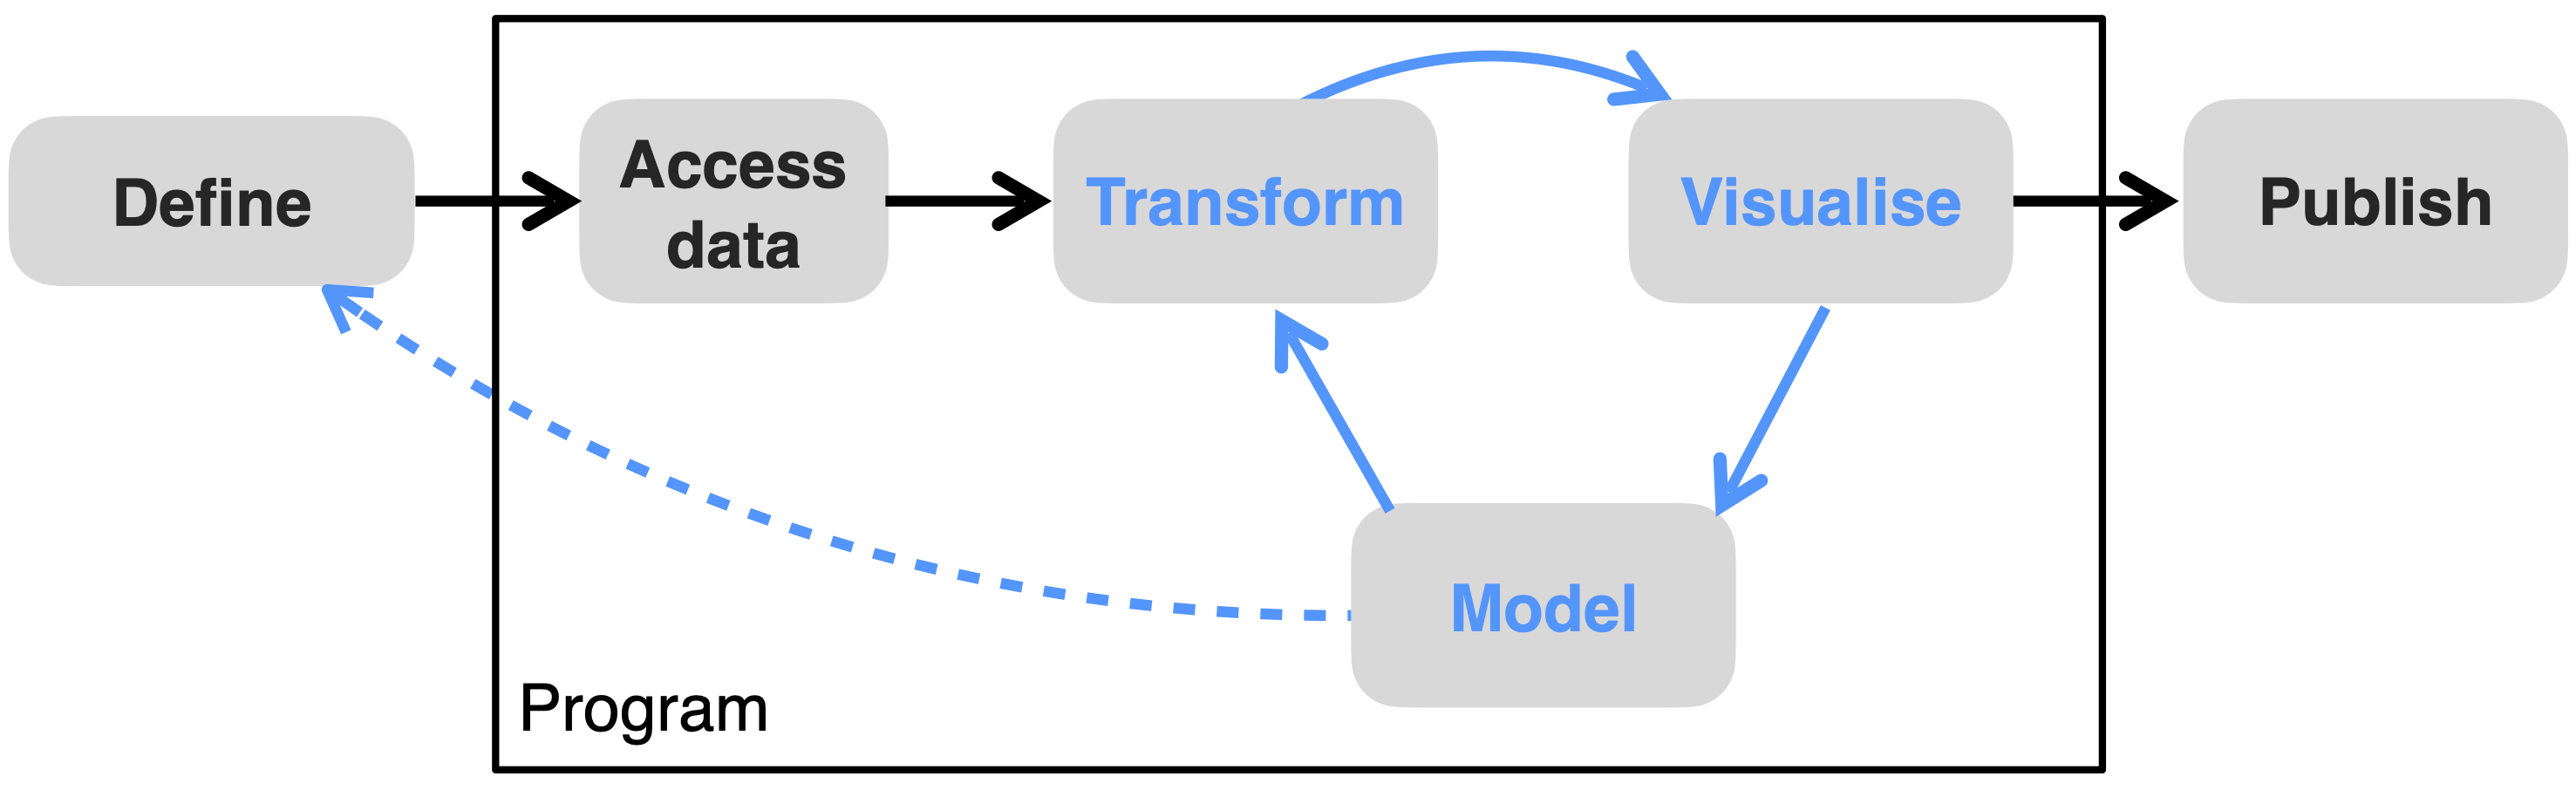 The data science workflow. Figure adapted from: [Wickham and Grolemund *R for Data Science*](https://r4ds.had.co.nz/index.html)